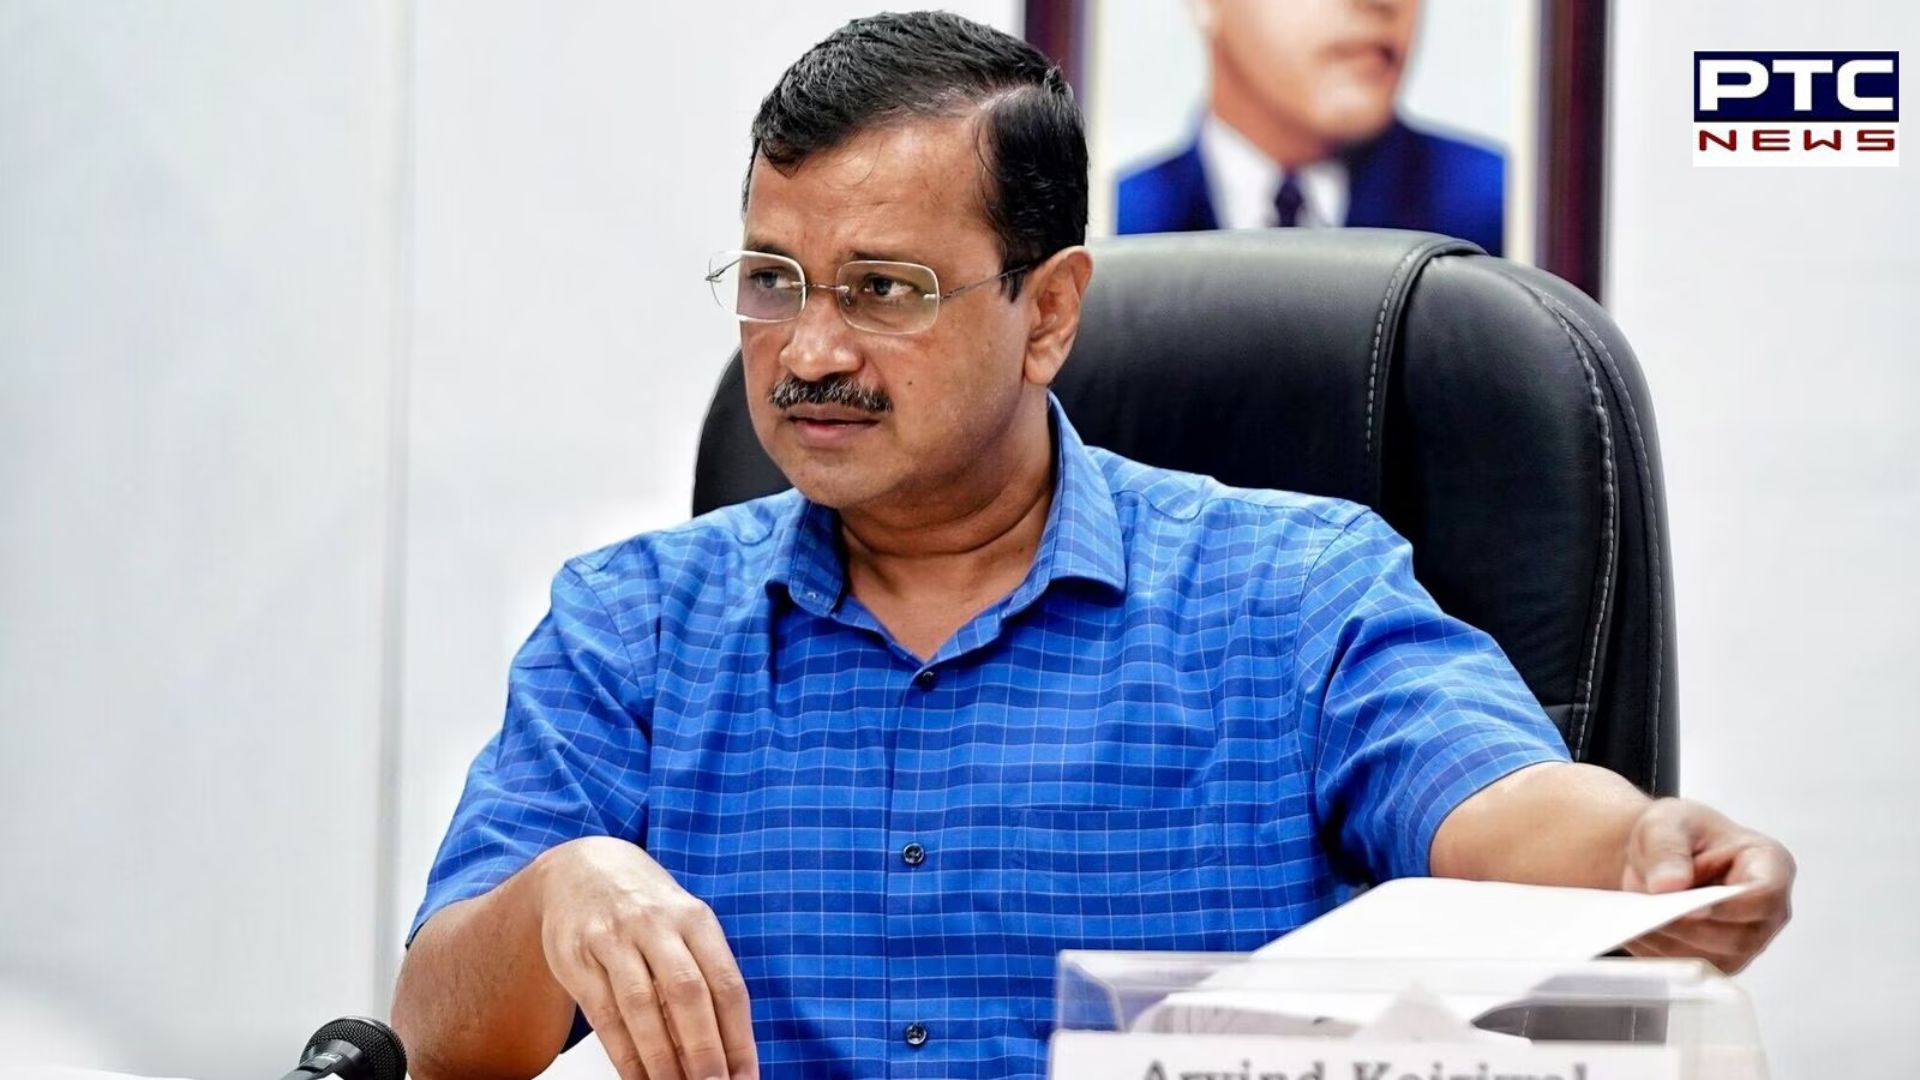 US calls for fair legal process in response to Arvind Kejriwal's arrest